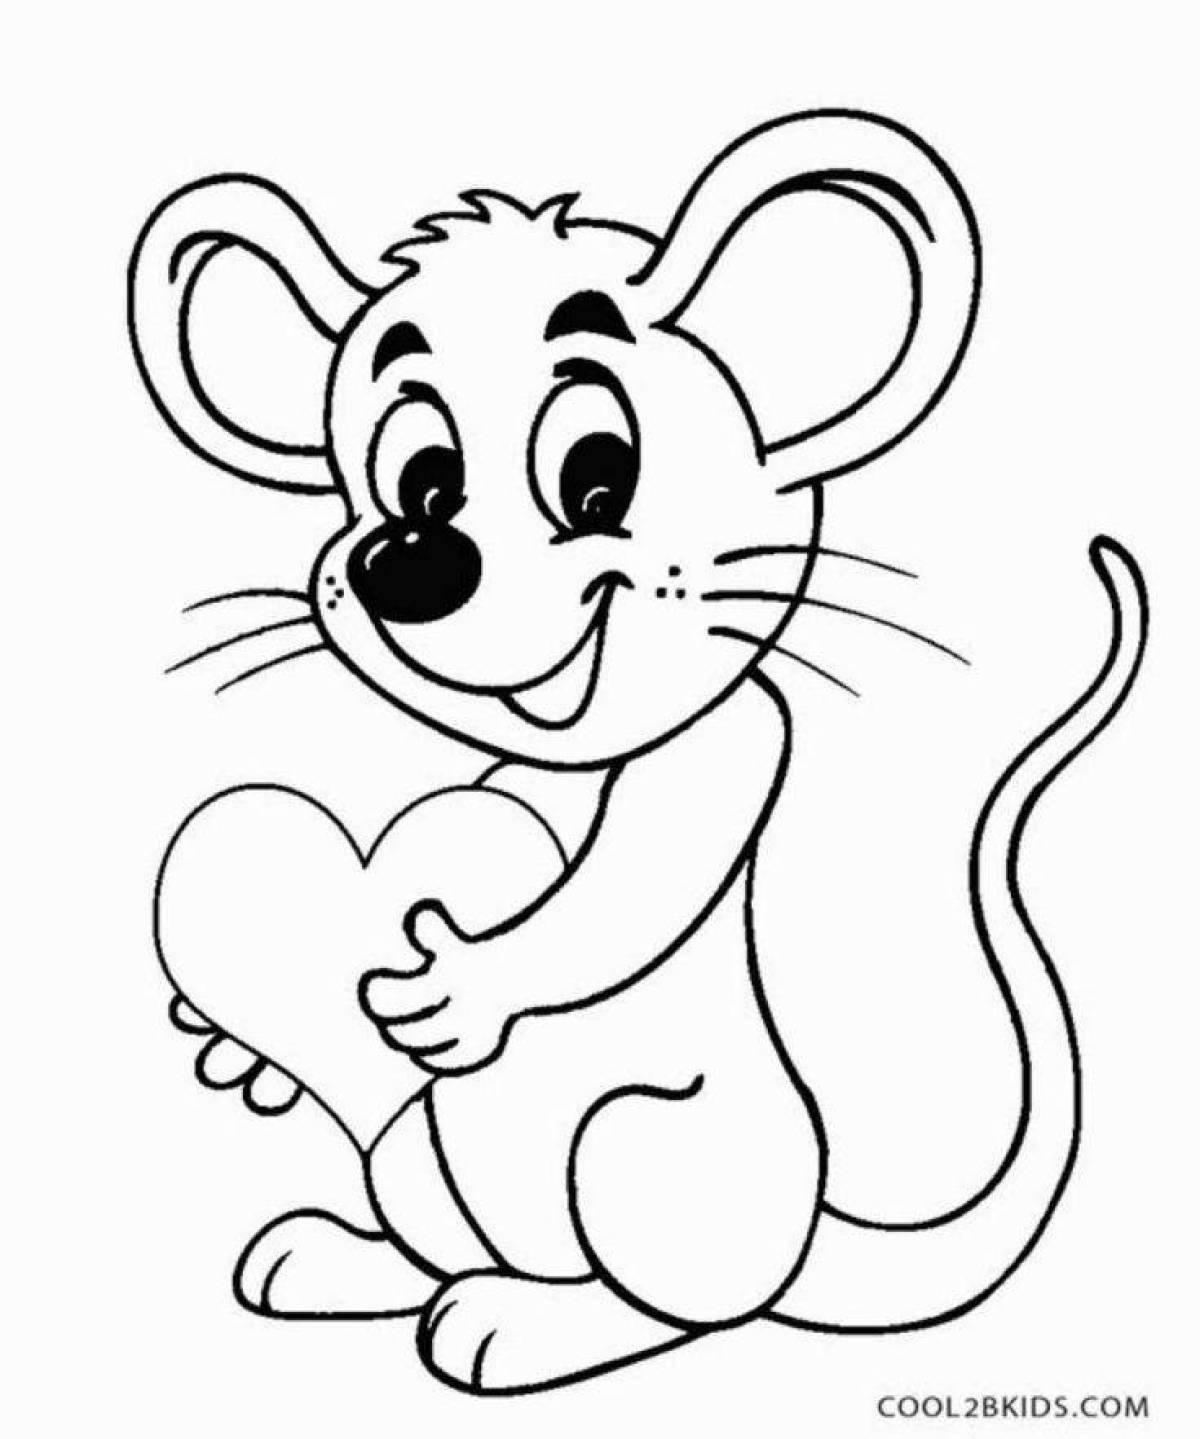 Playful coloring mouse